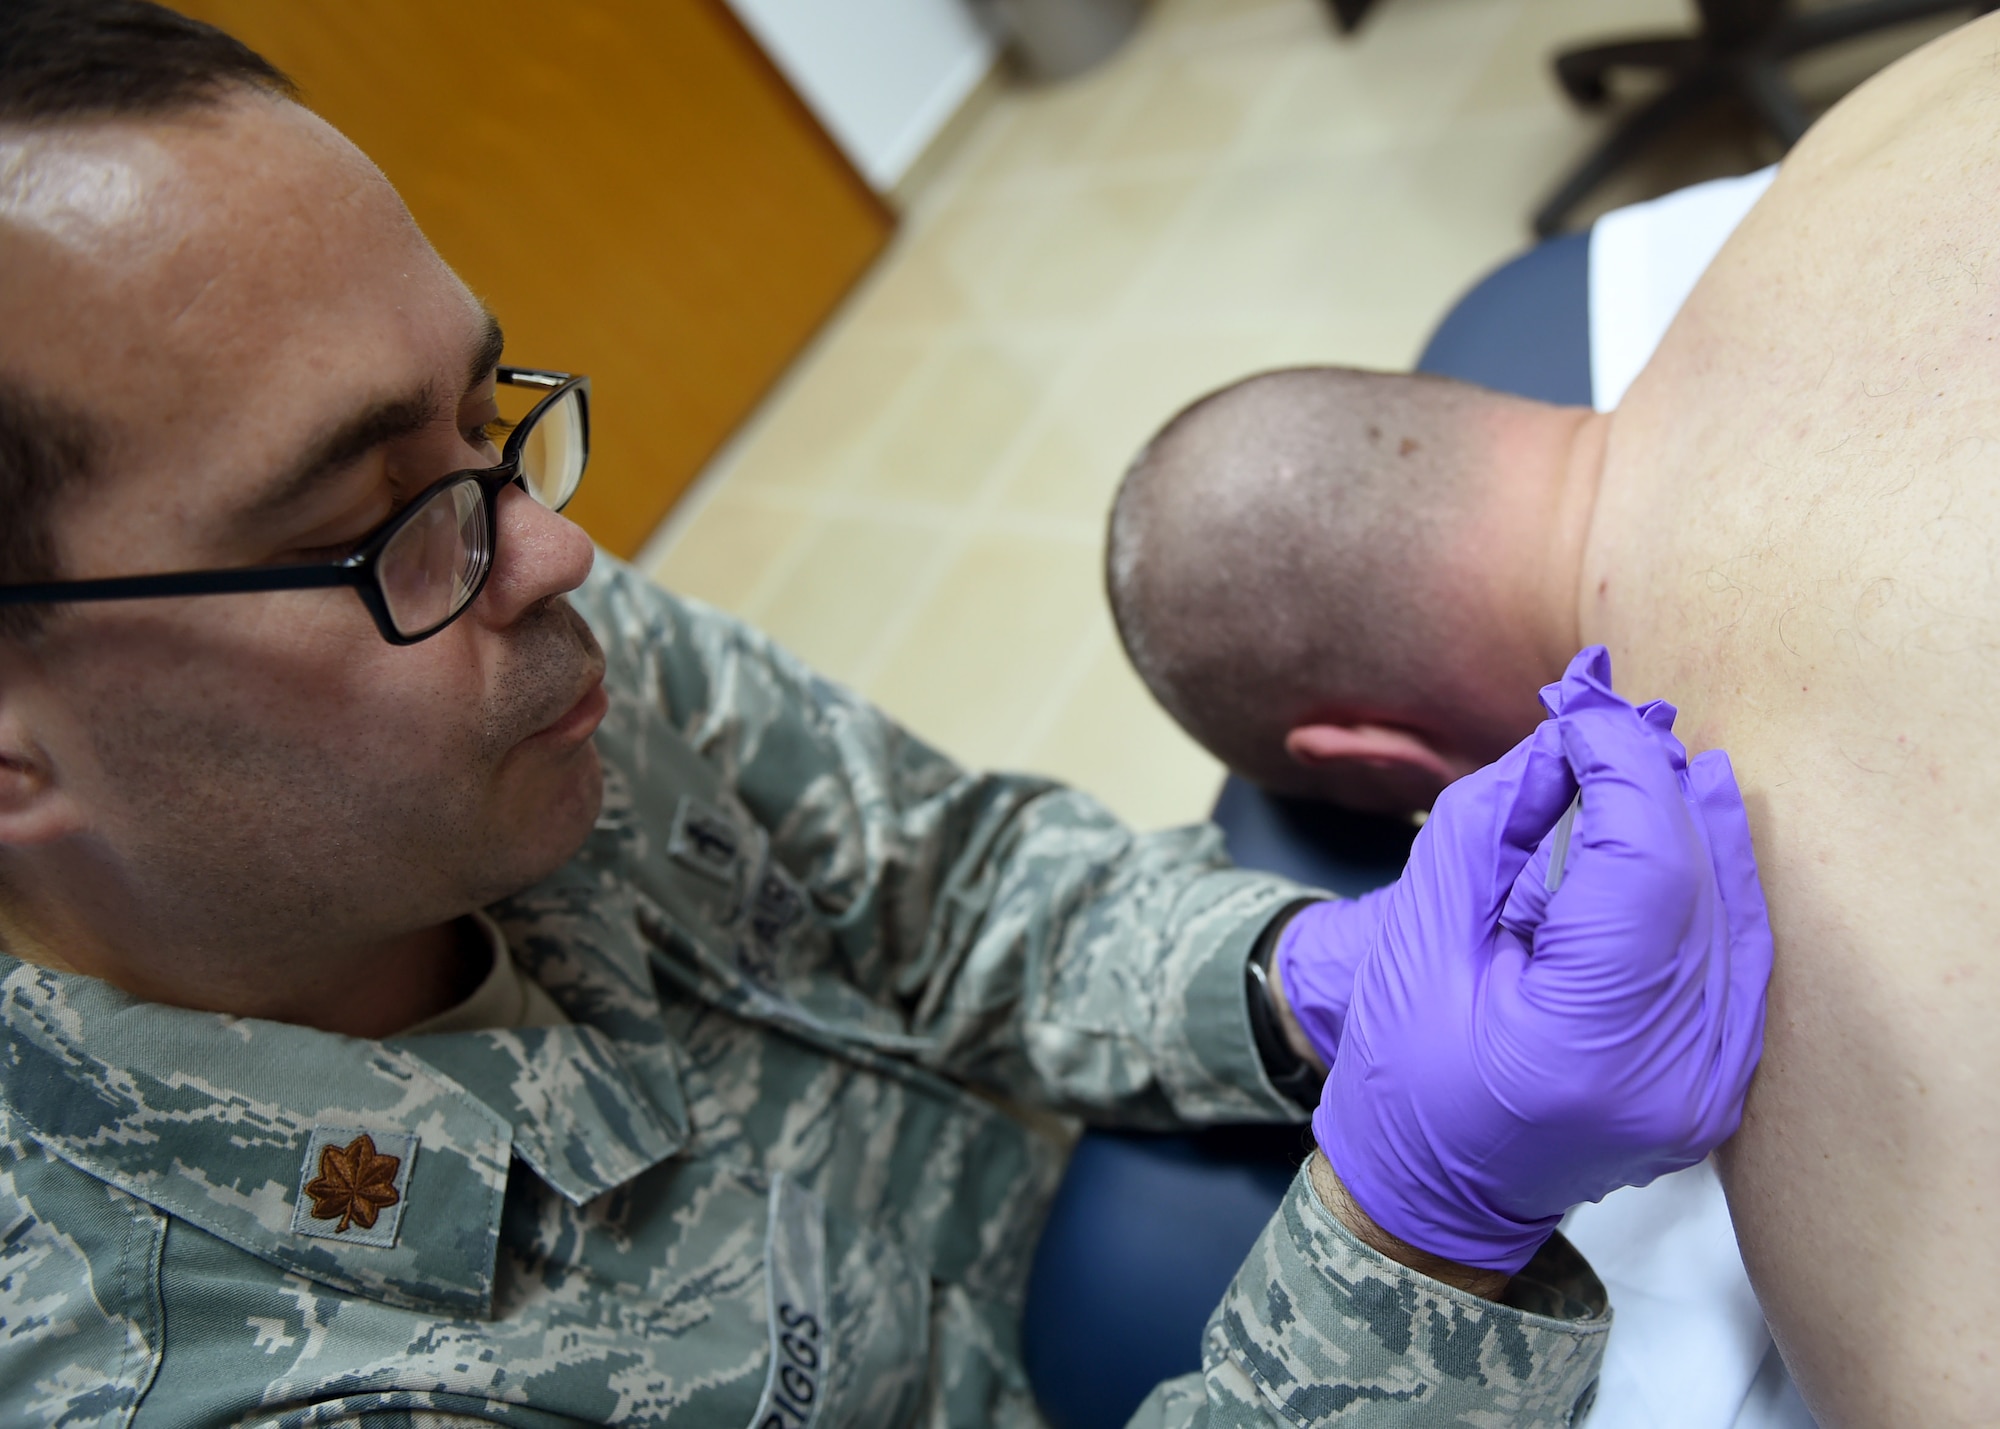 Maj. Robert Briggs, 386th Expeditionary Medical Group physical therapist, conducts trigger point dry needling therapy on a patient at an undisclosed location in Southwest Asia, Feb. 12, 2016. The physical therapy was established to meet the growing needs of Airmen and coalition forces deployed in support of Operation INHERENT RESOLVE. (U.S. Air Force photo by Staff Sgt. Jerilyn Quintanilla)